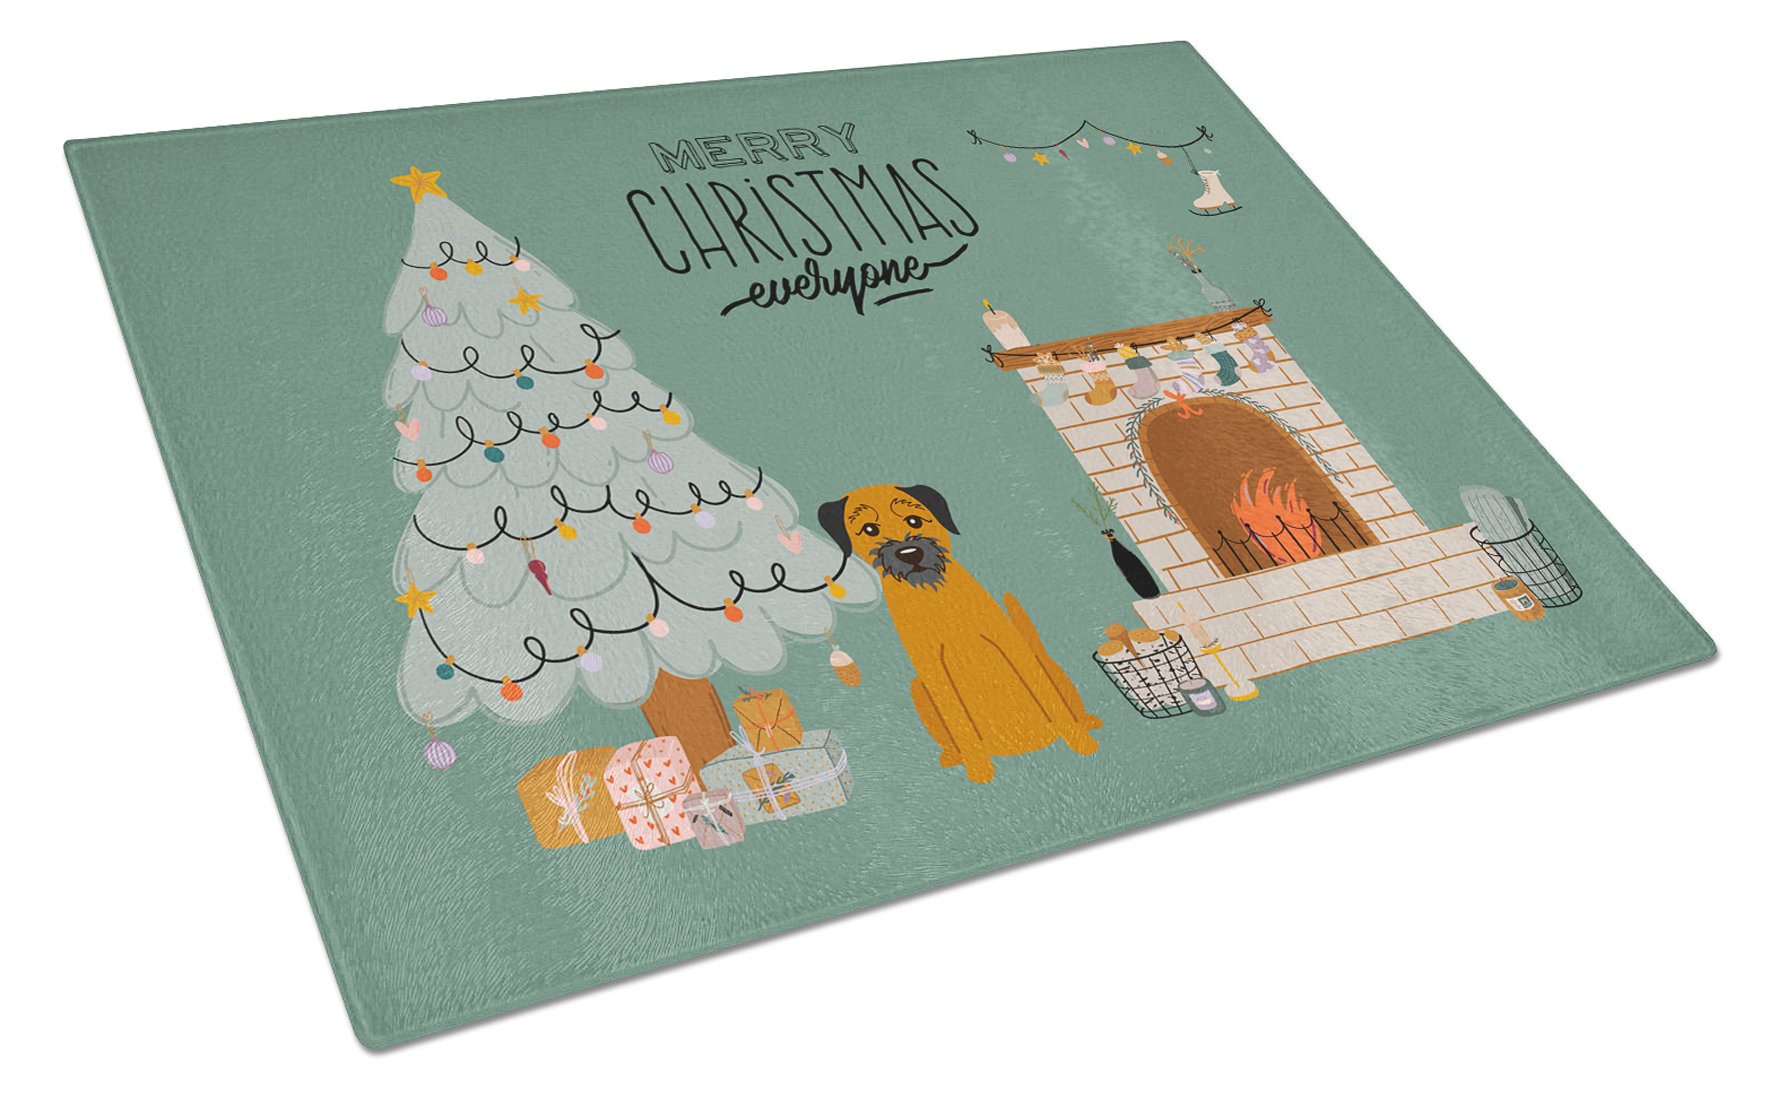 Border Terrier Christmas Everyone Glass Cutting Board Large CK7602LCB by Caroline's Treasures